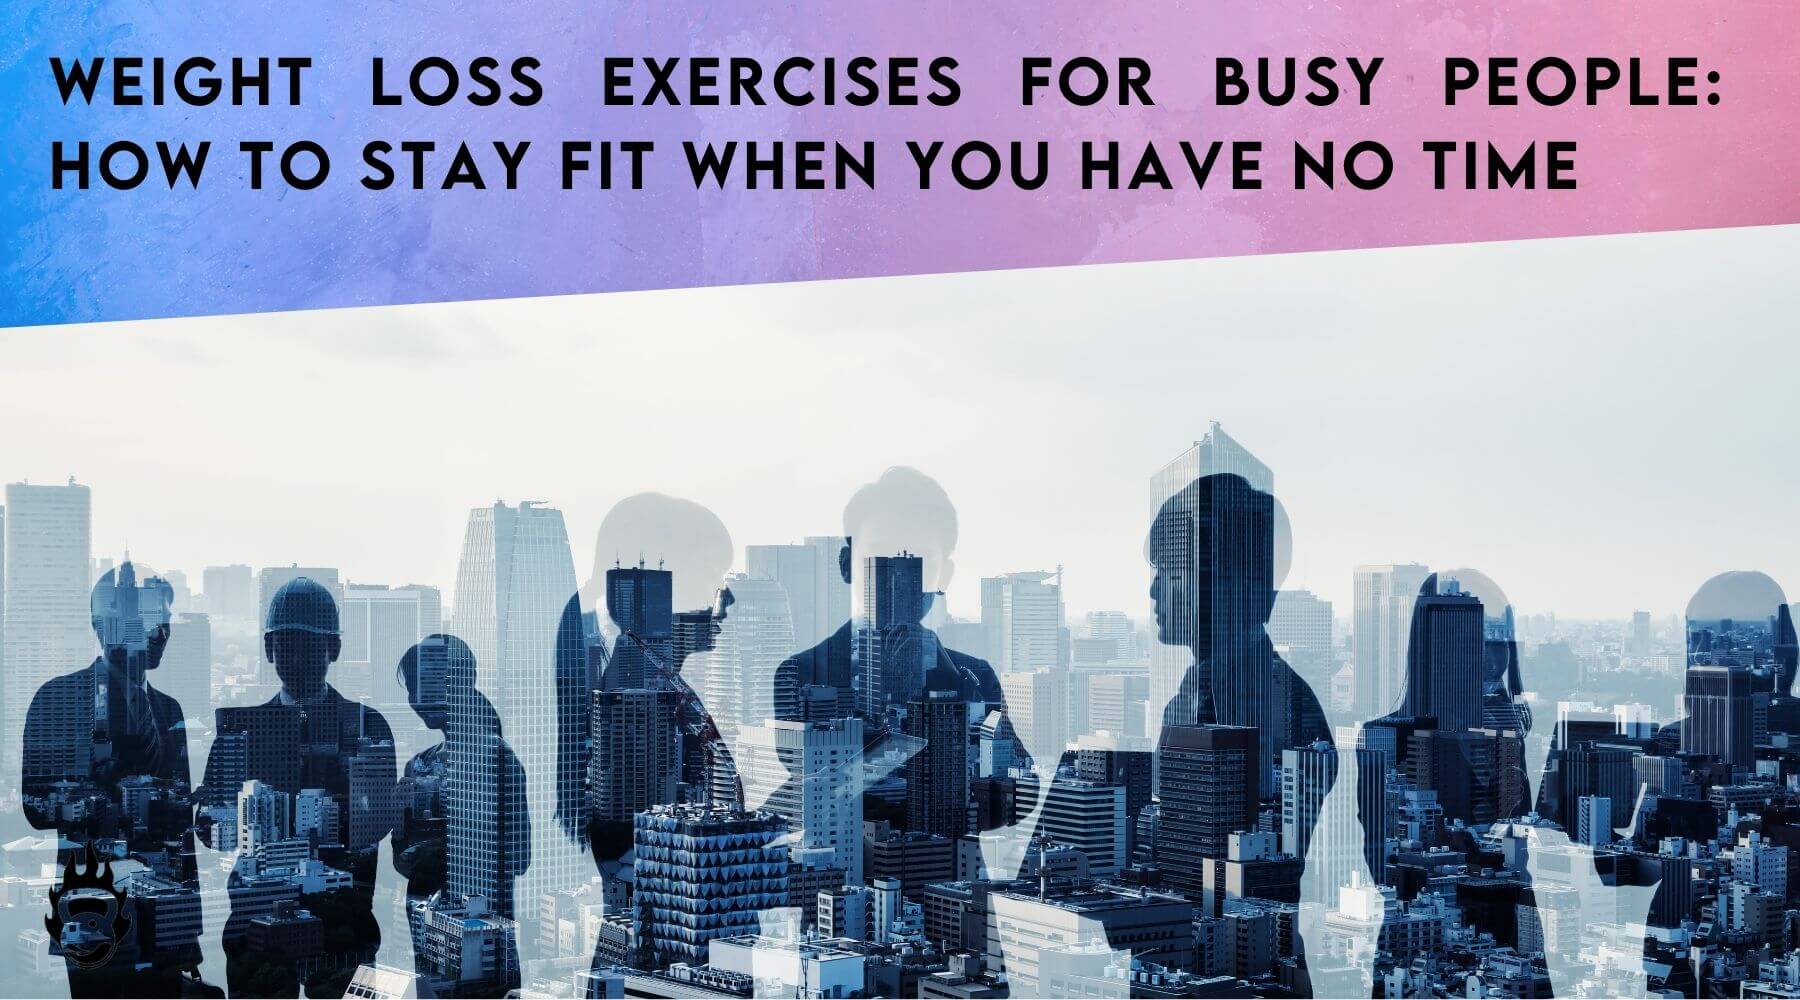 Weight Loss Exercises for Busy People: How to Stay Fit When You Have No Time